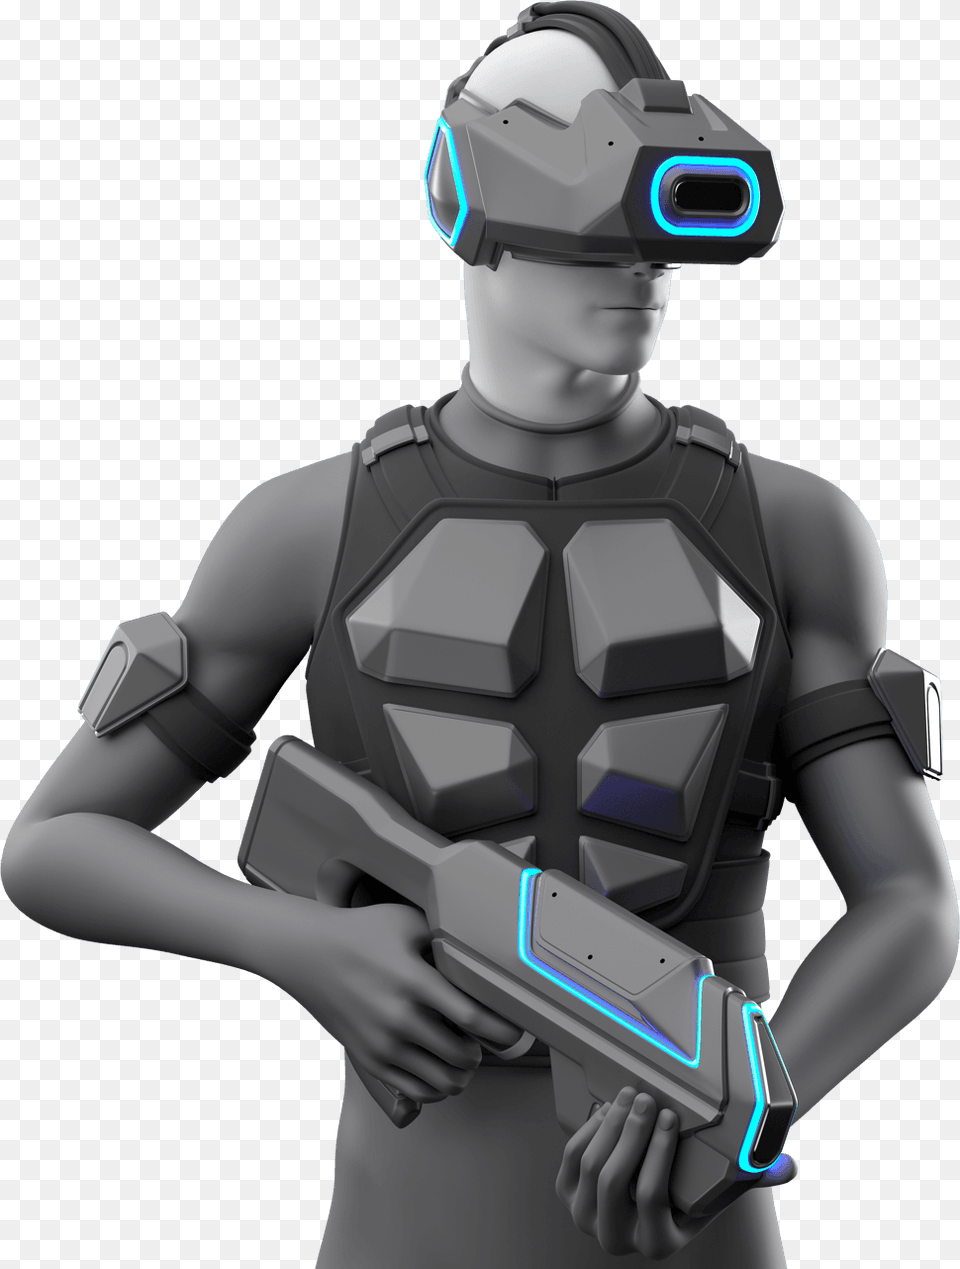 Vr Character With Active Markers Optitrack Vr, Electrical Device, Switch, Vr Headset Free Transparent Png